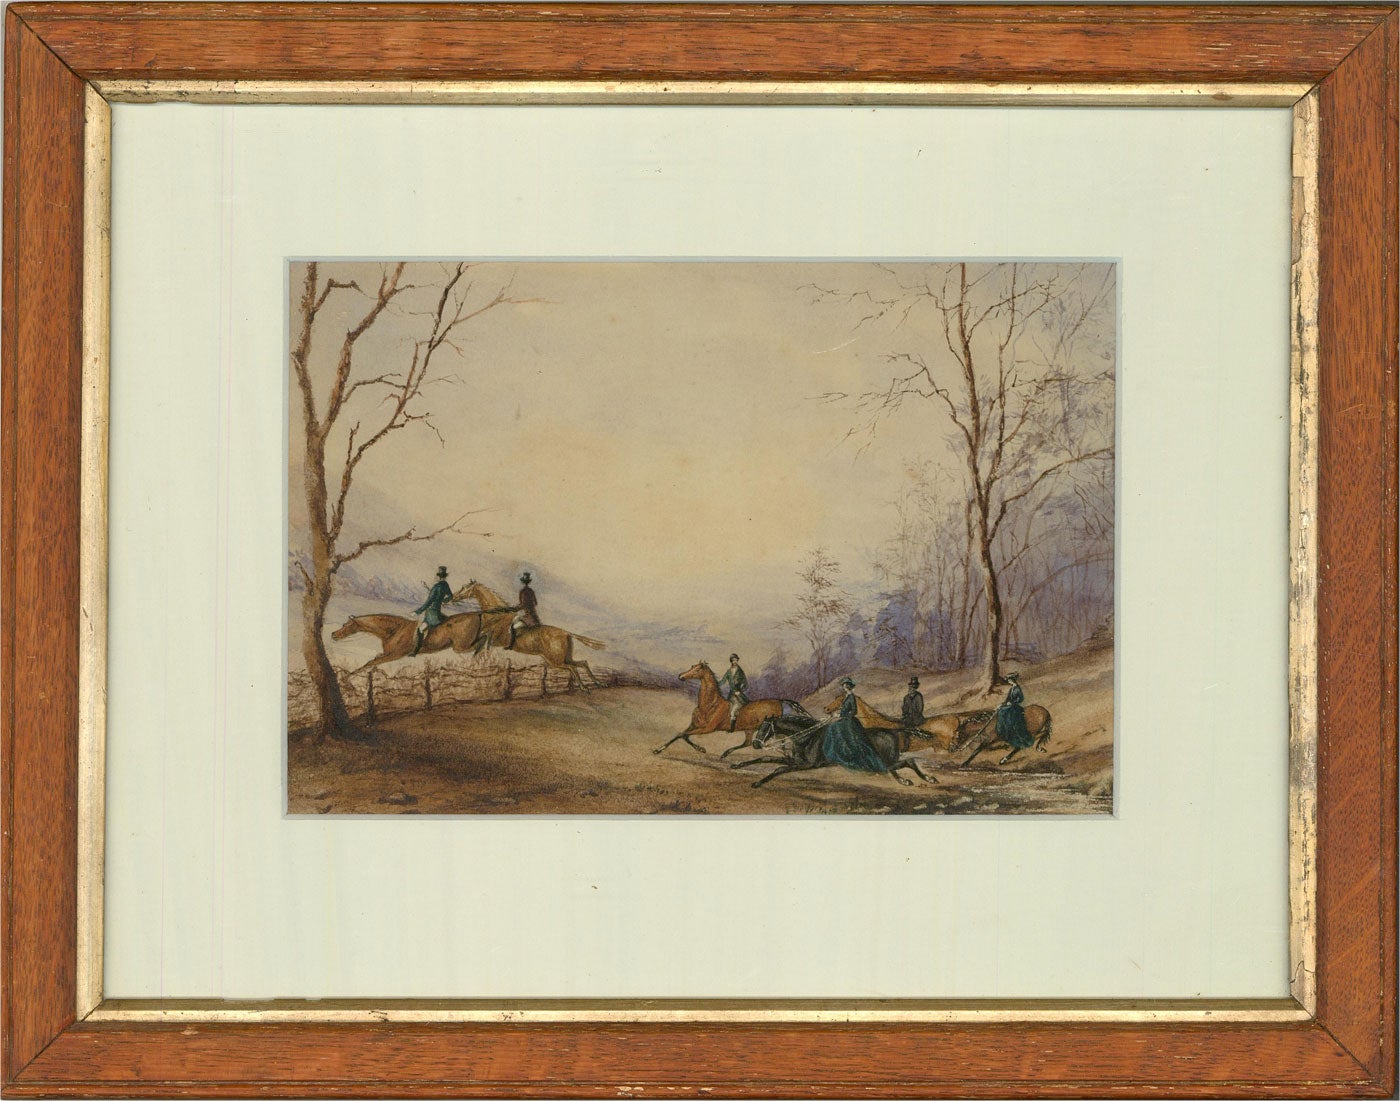 Unknown Figurative Art - c.1853 Watercolour - Admiral Inglefield's Hunting Party